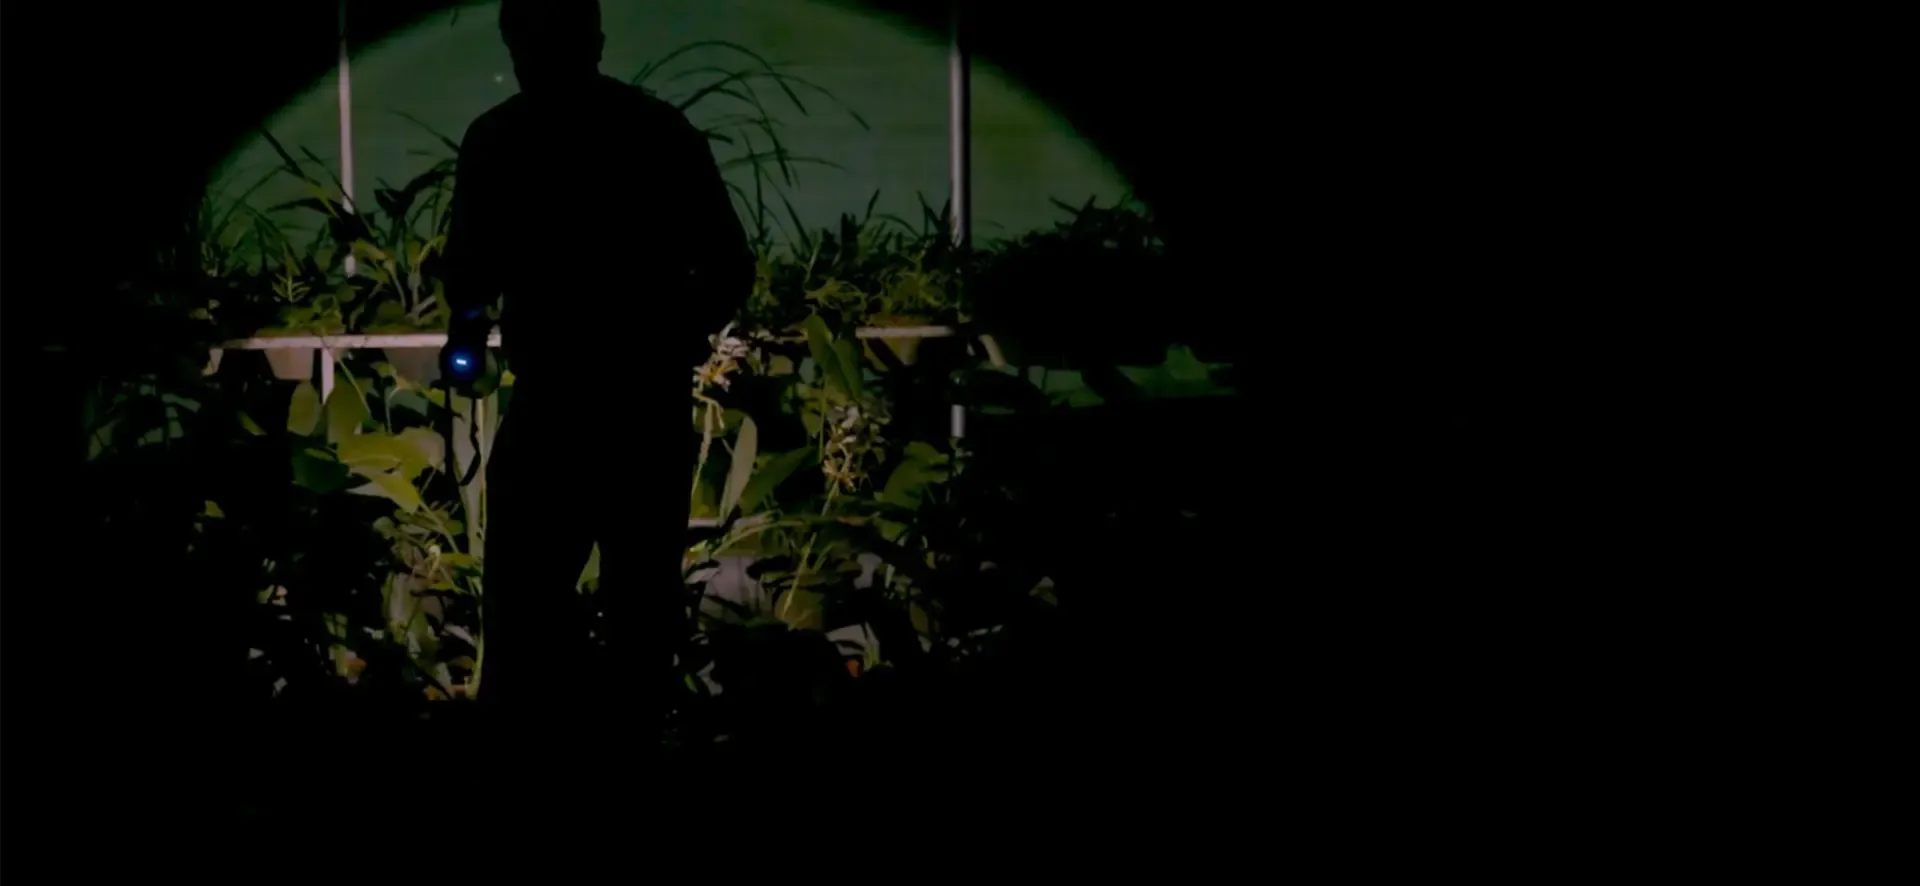 A silhouette of a man in the darkness shining a torch at several potted plants'